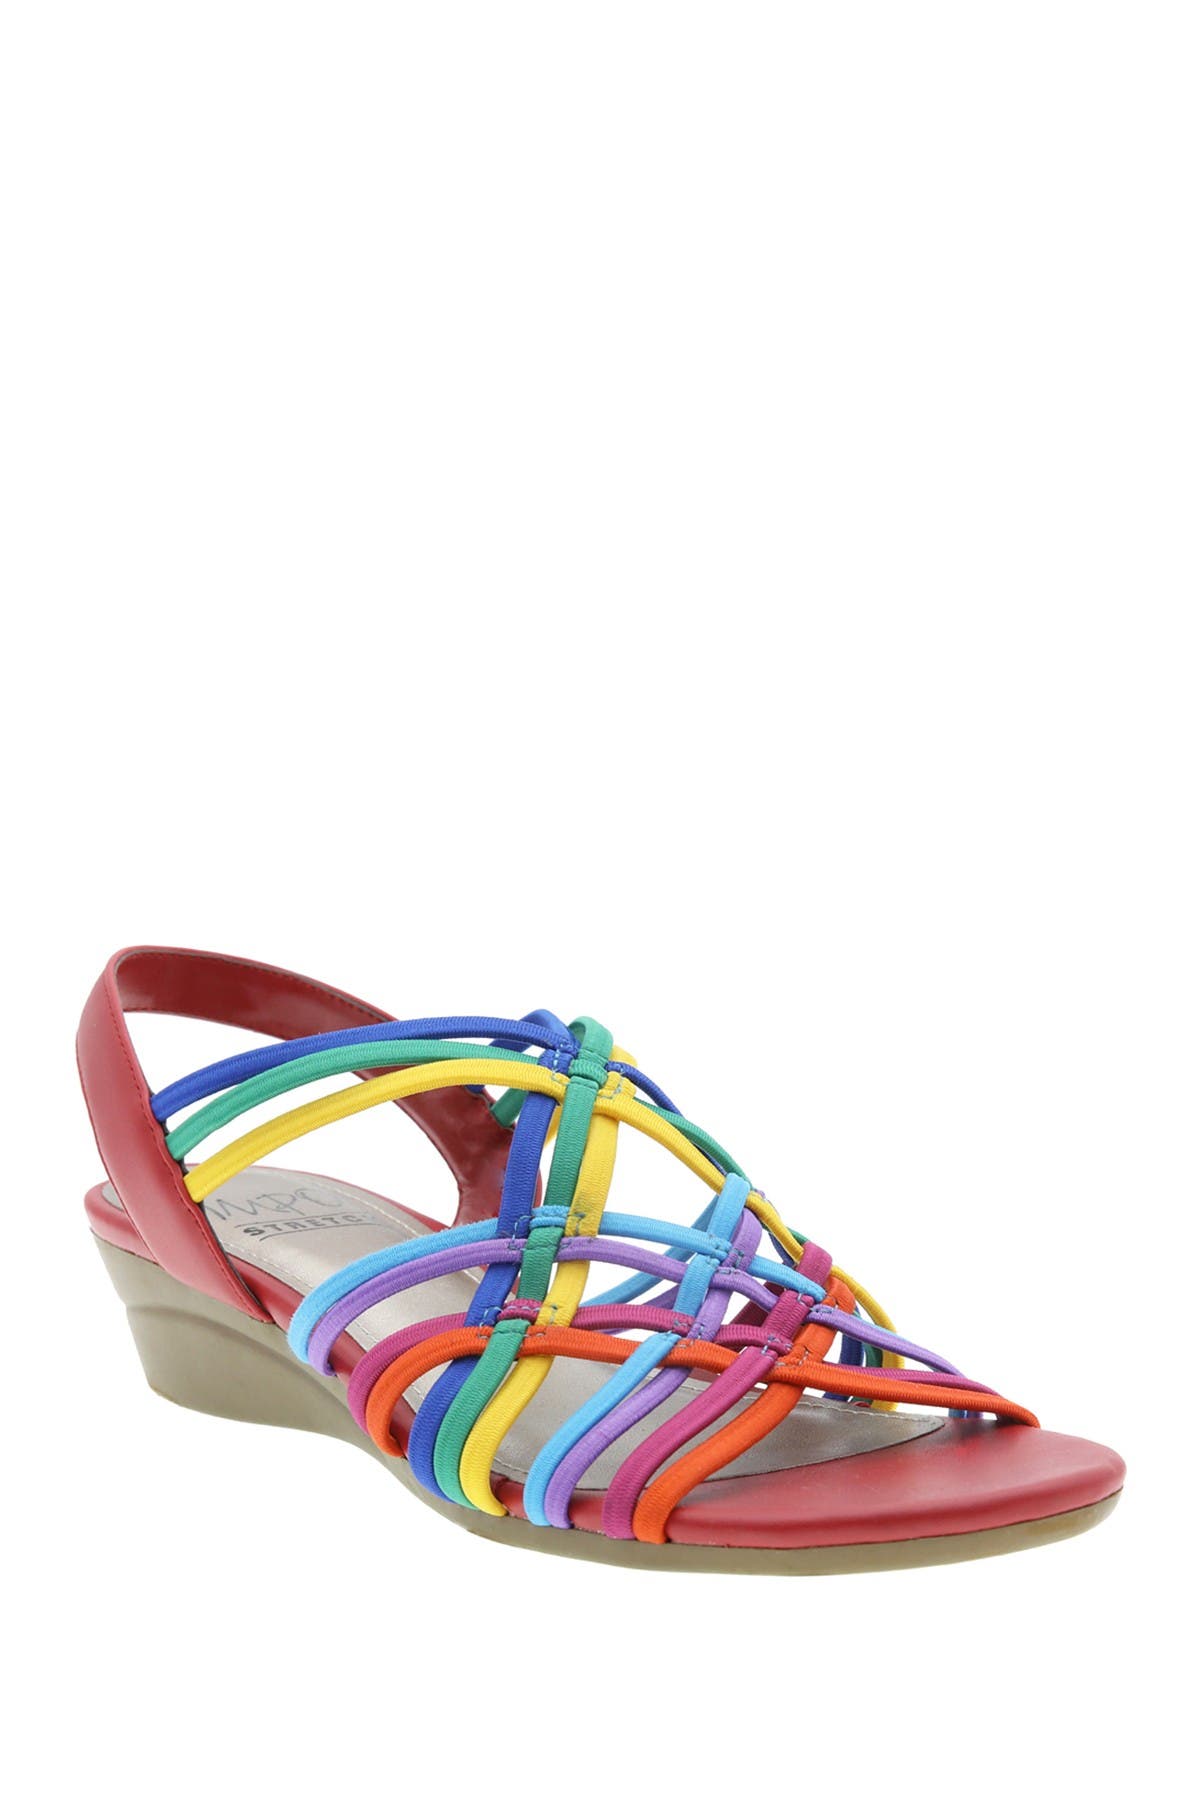 Impo Rainelle Stretch Wedge Sandal In Bright Mul